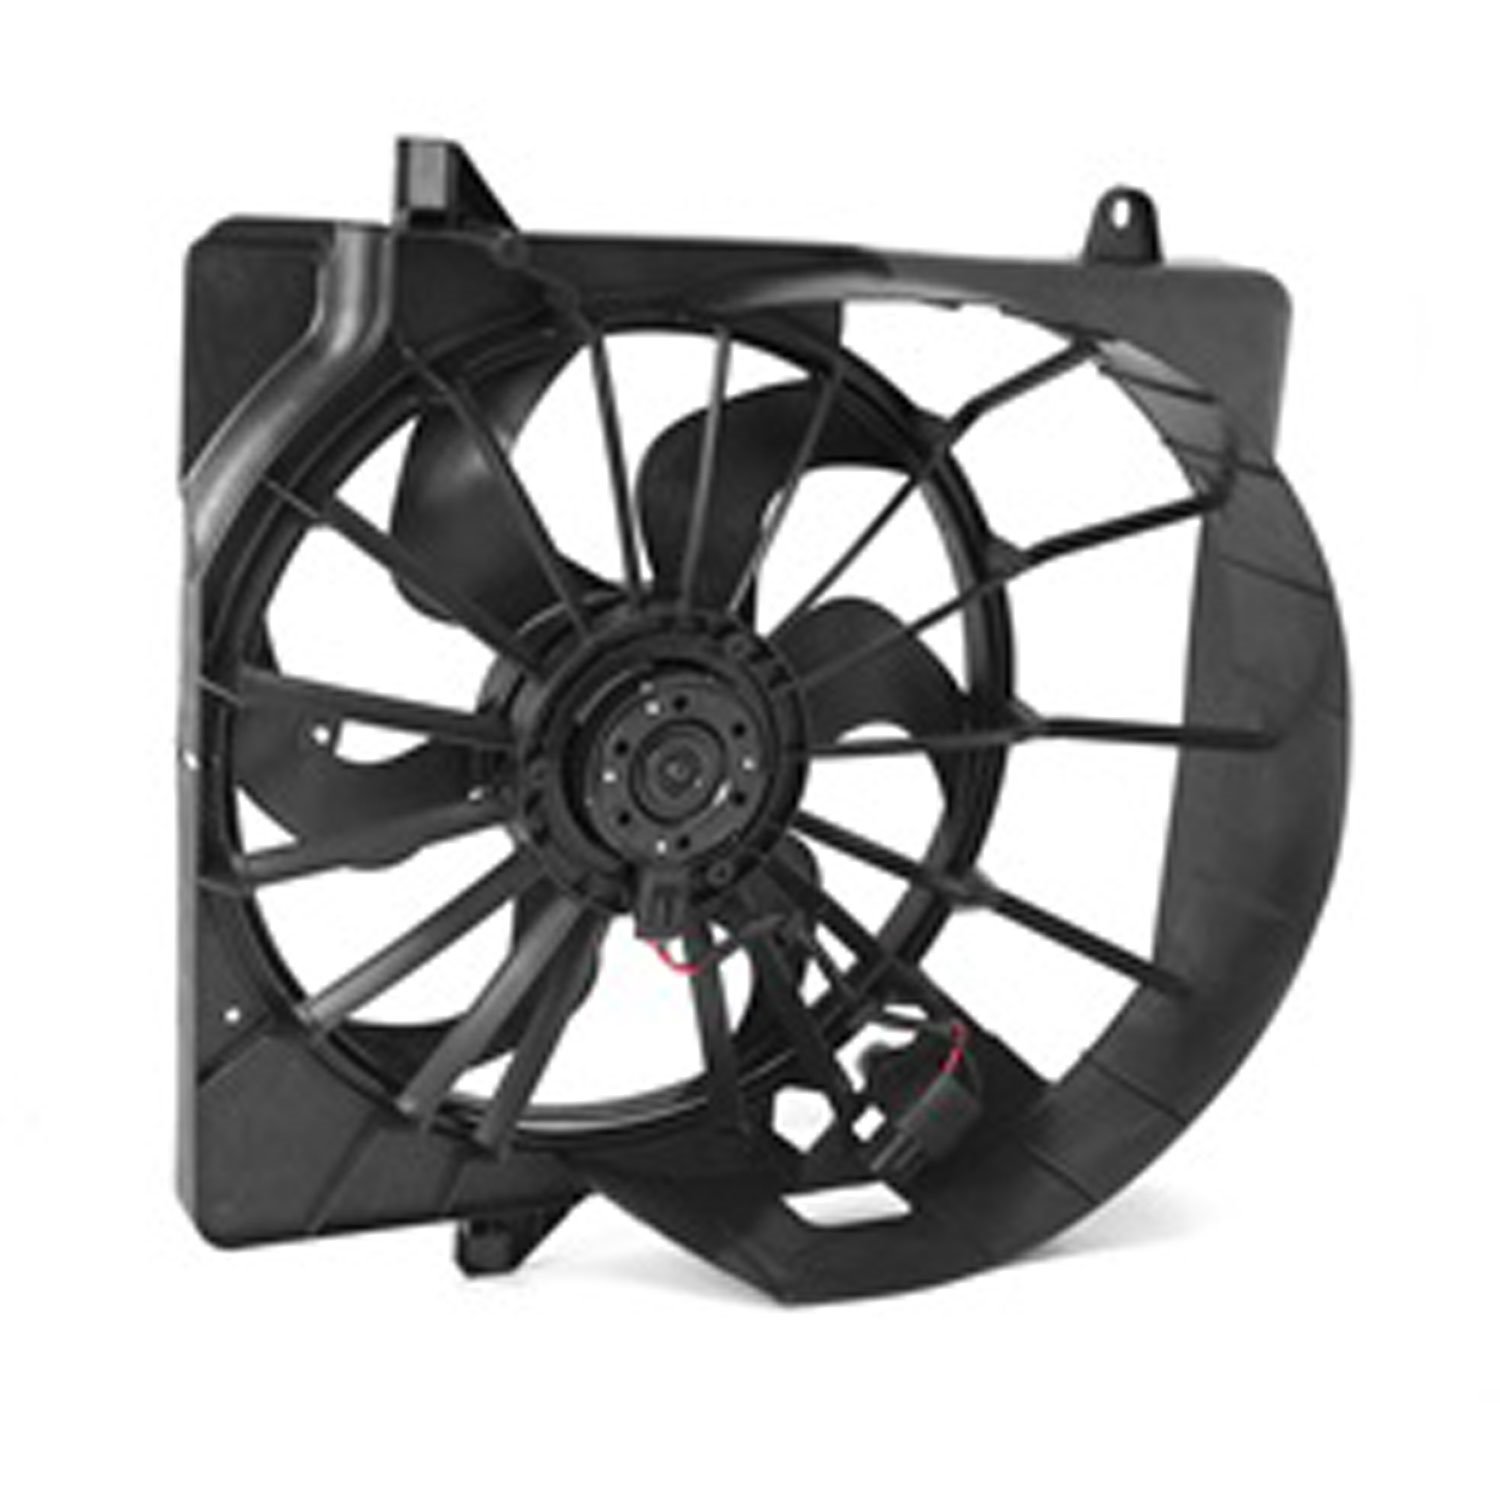 Replacement fan assembly from Omix-ADA, Fits 08-10 Jeep Liberty KK s with a 3.7L engine.